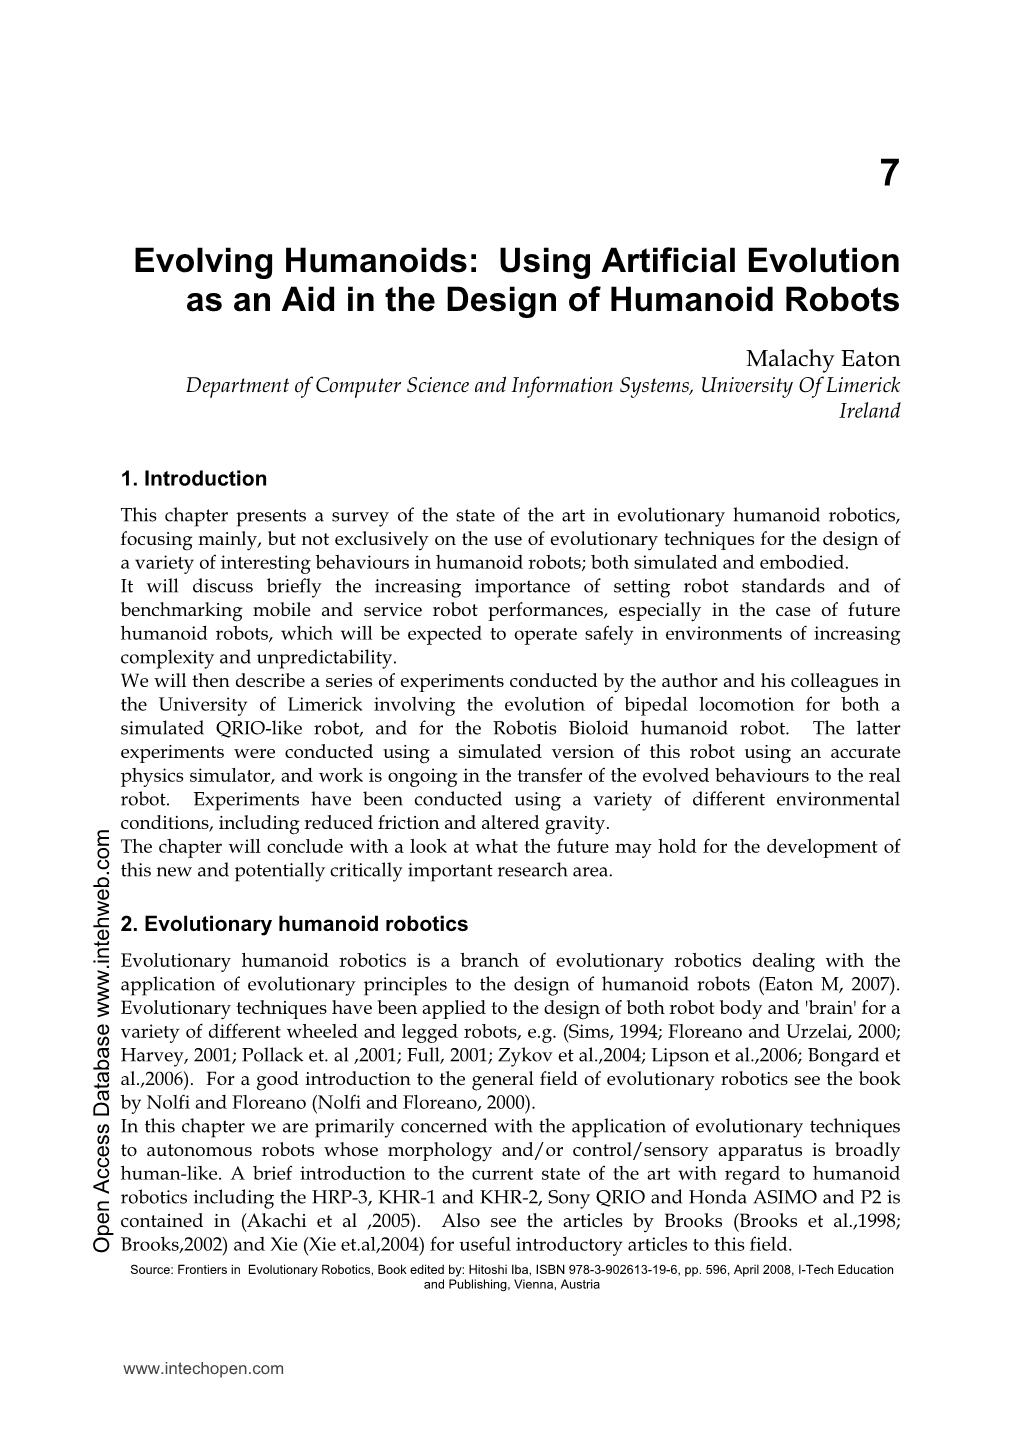 Evolving Humanoids: Using Artificial Evolution As an Aid in the Design of Humanoid Robots